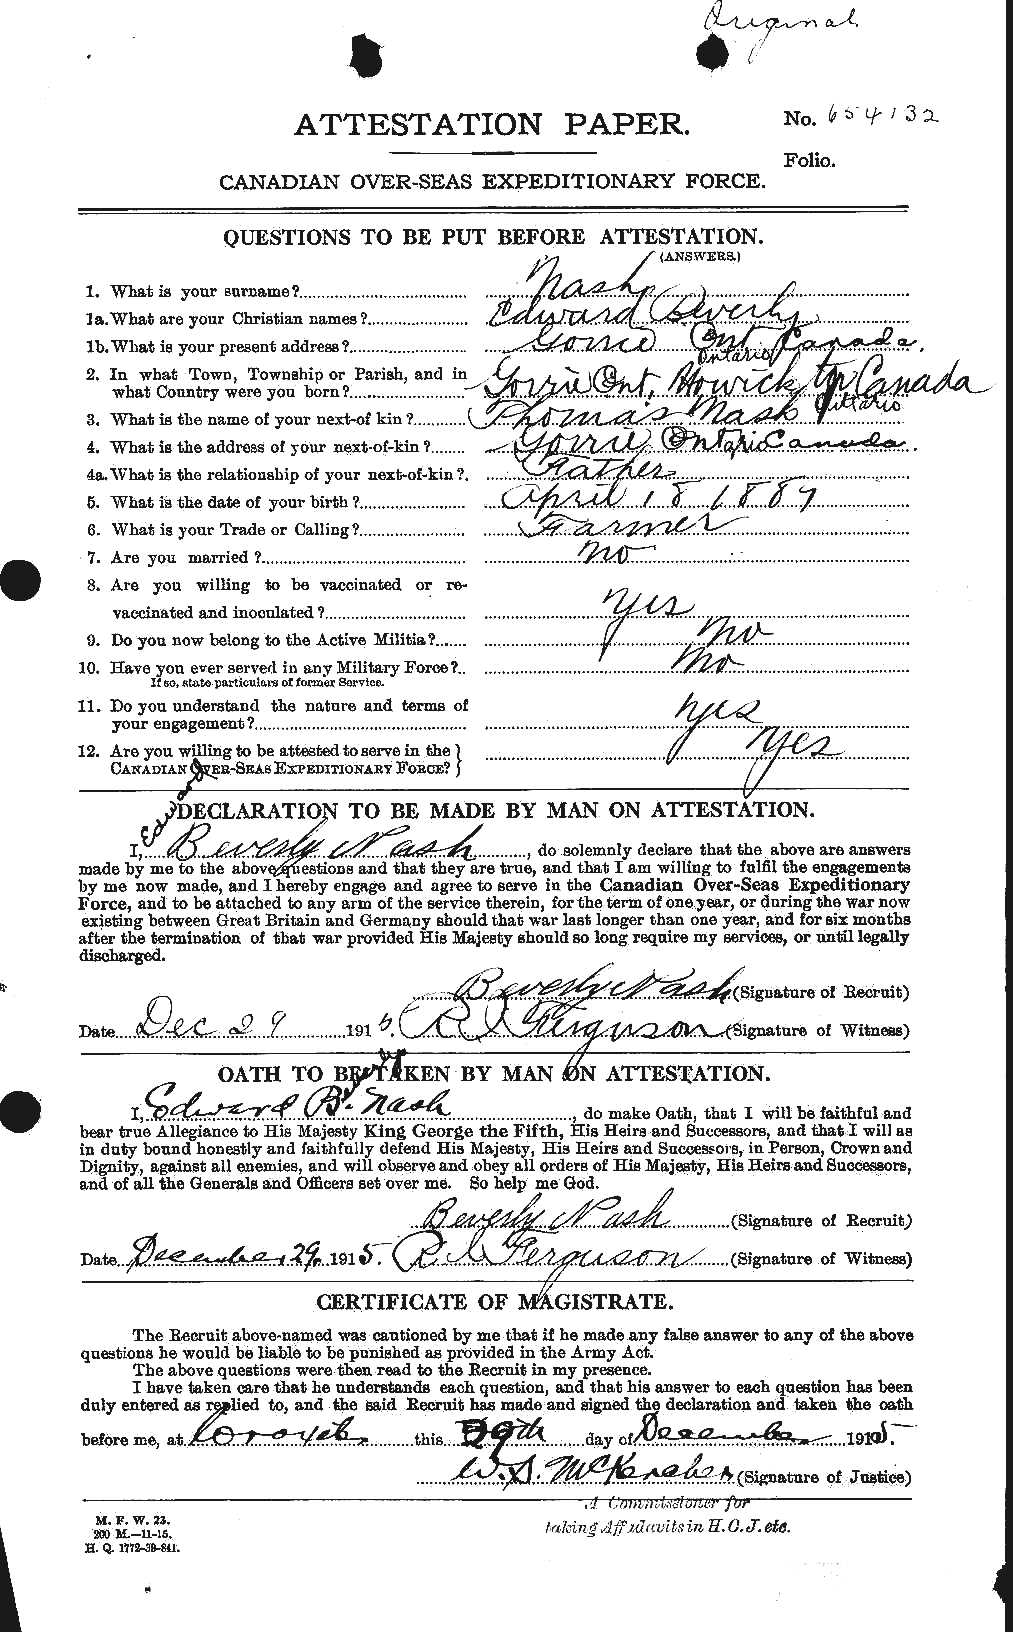 Personnel Records of the First World War - CEF 548937a